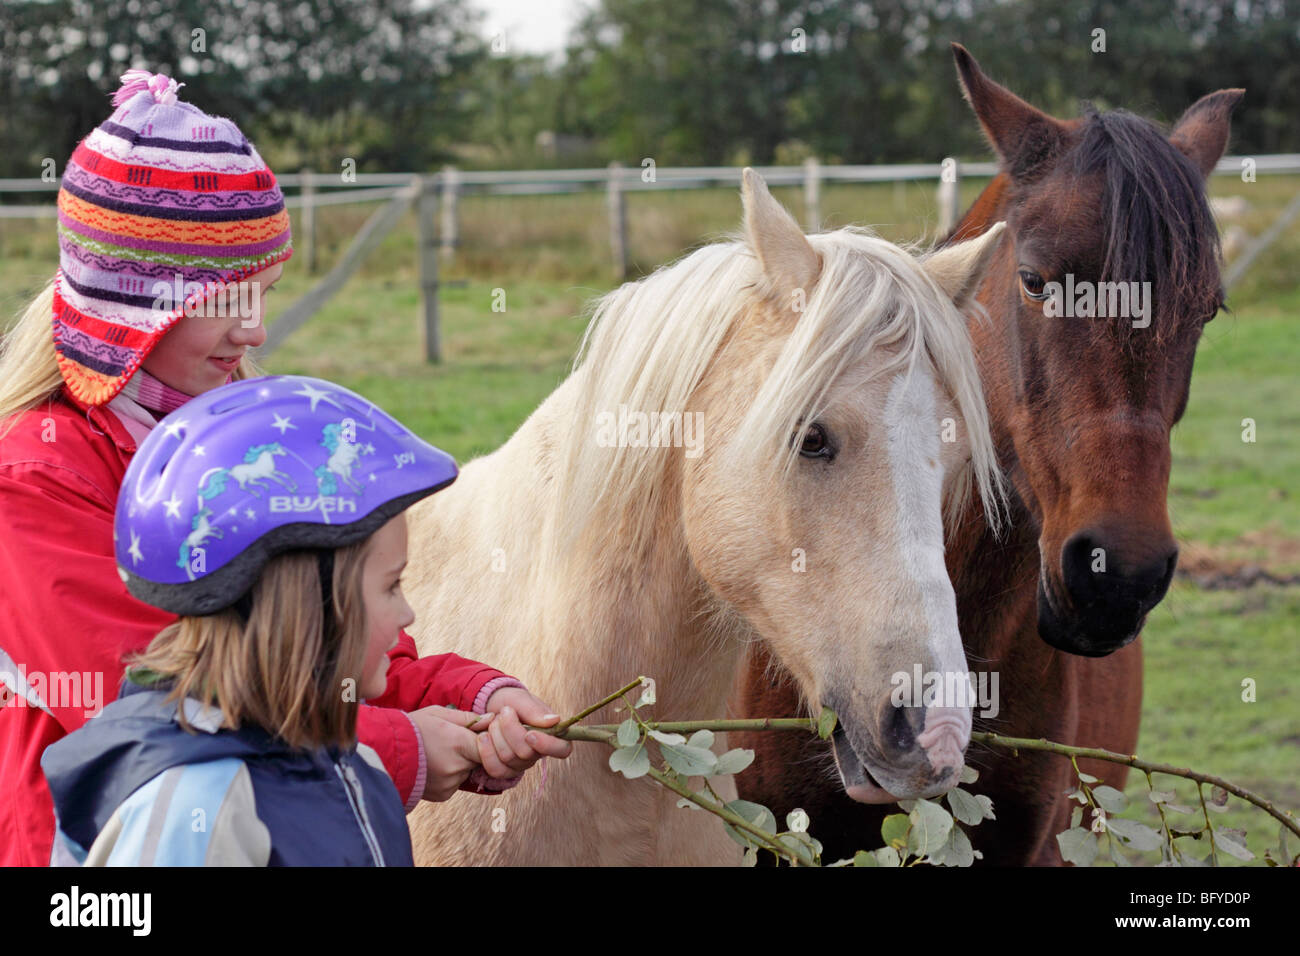 two young girls with ponies Stock Photo